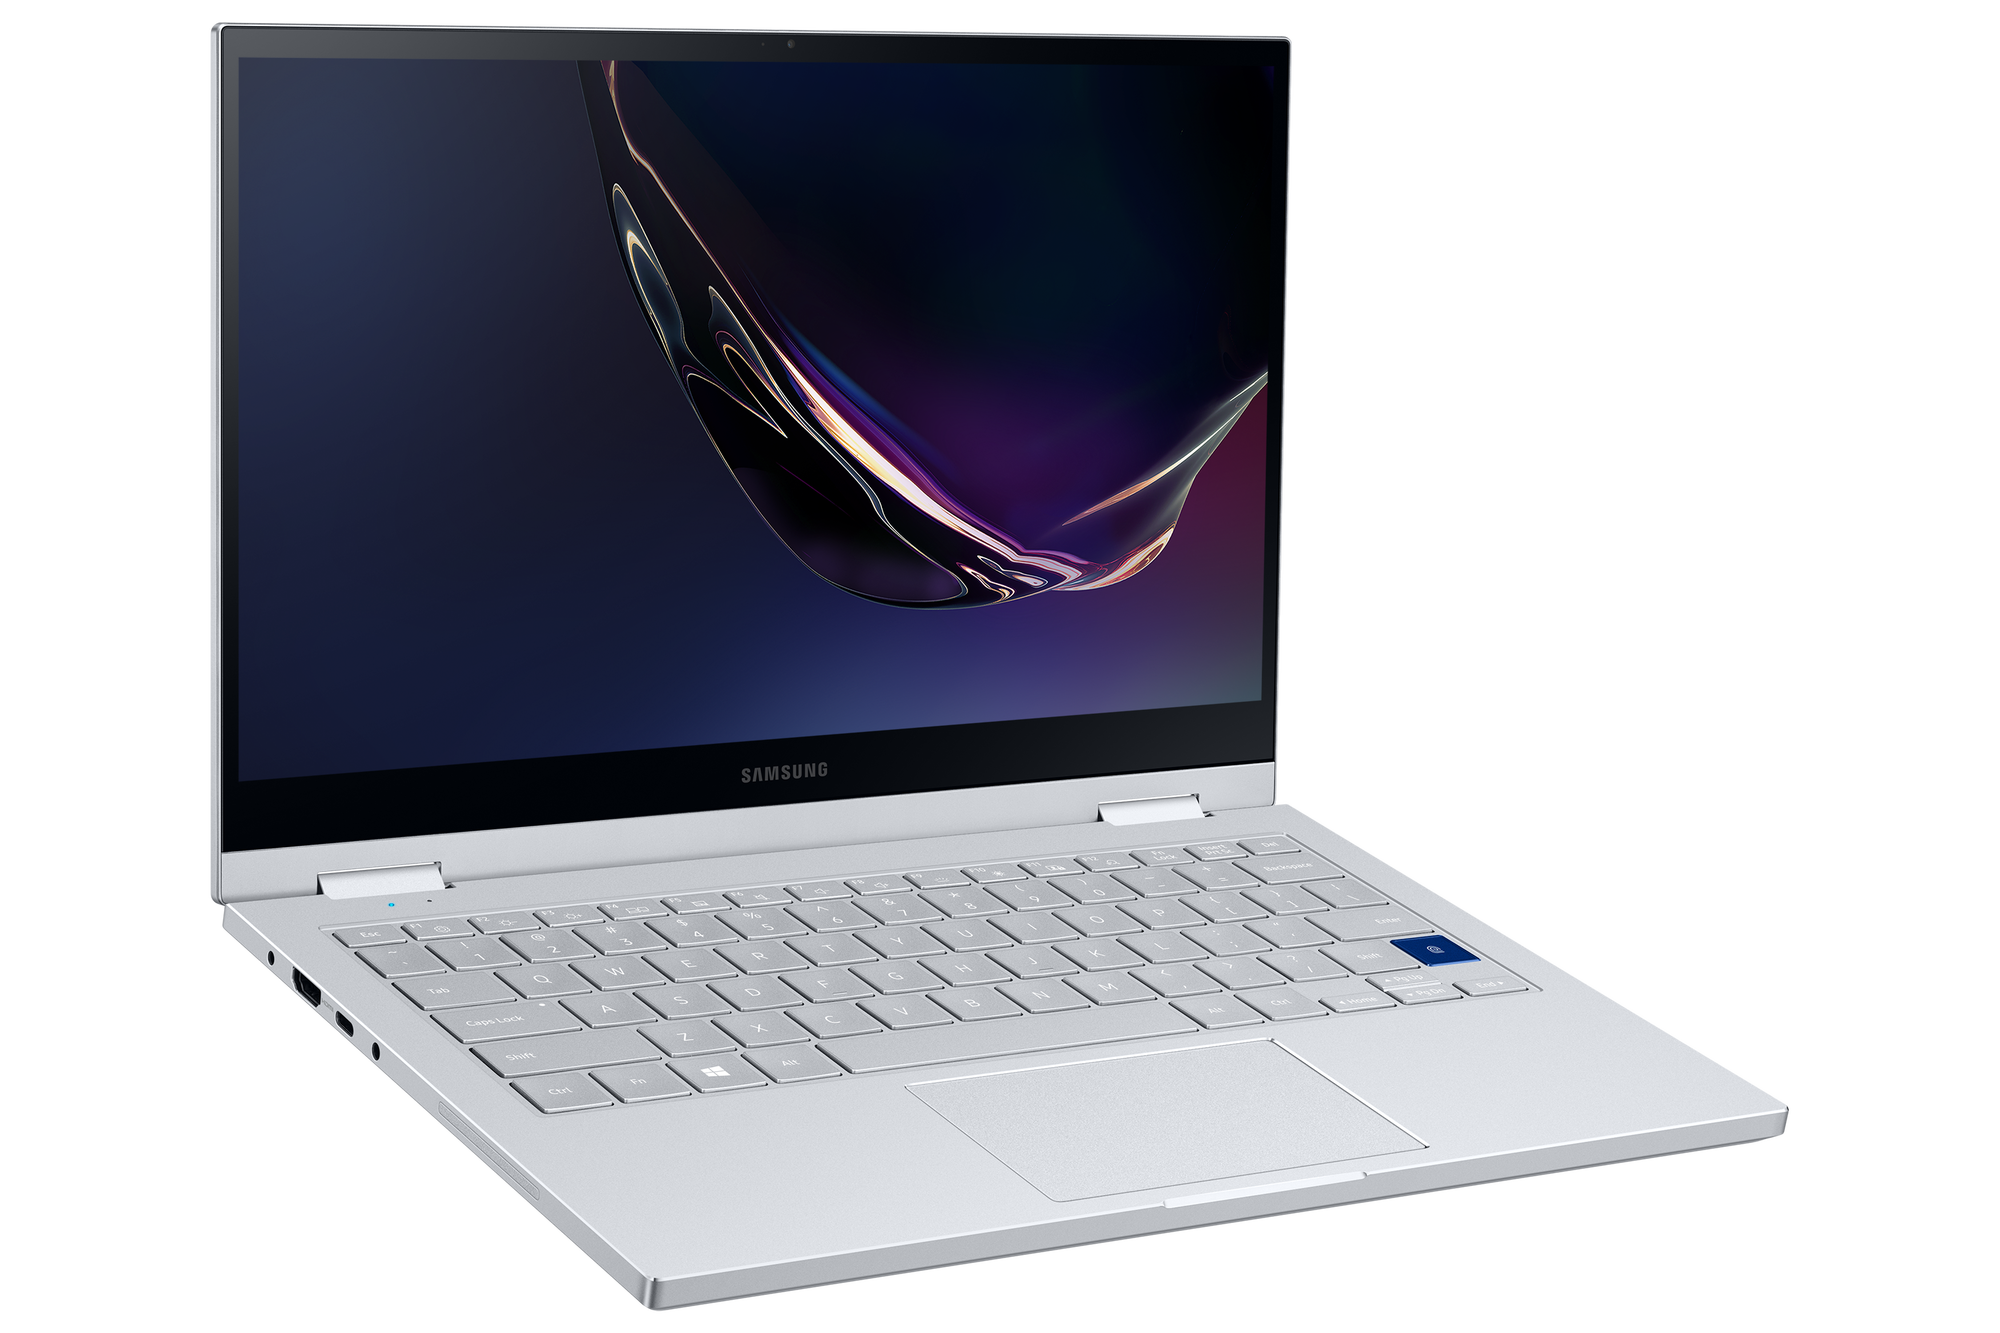 Samsung Galaxy Book S Refuses up Update to 20H2! NP730QCJ_011_L-Perspective_Royal-Silver.png